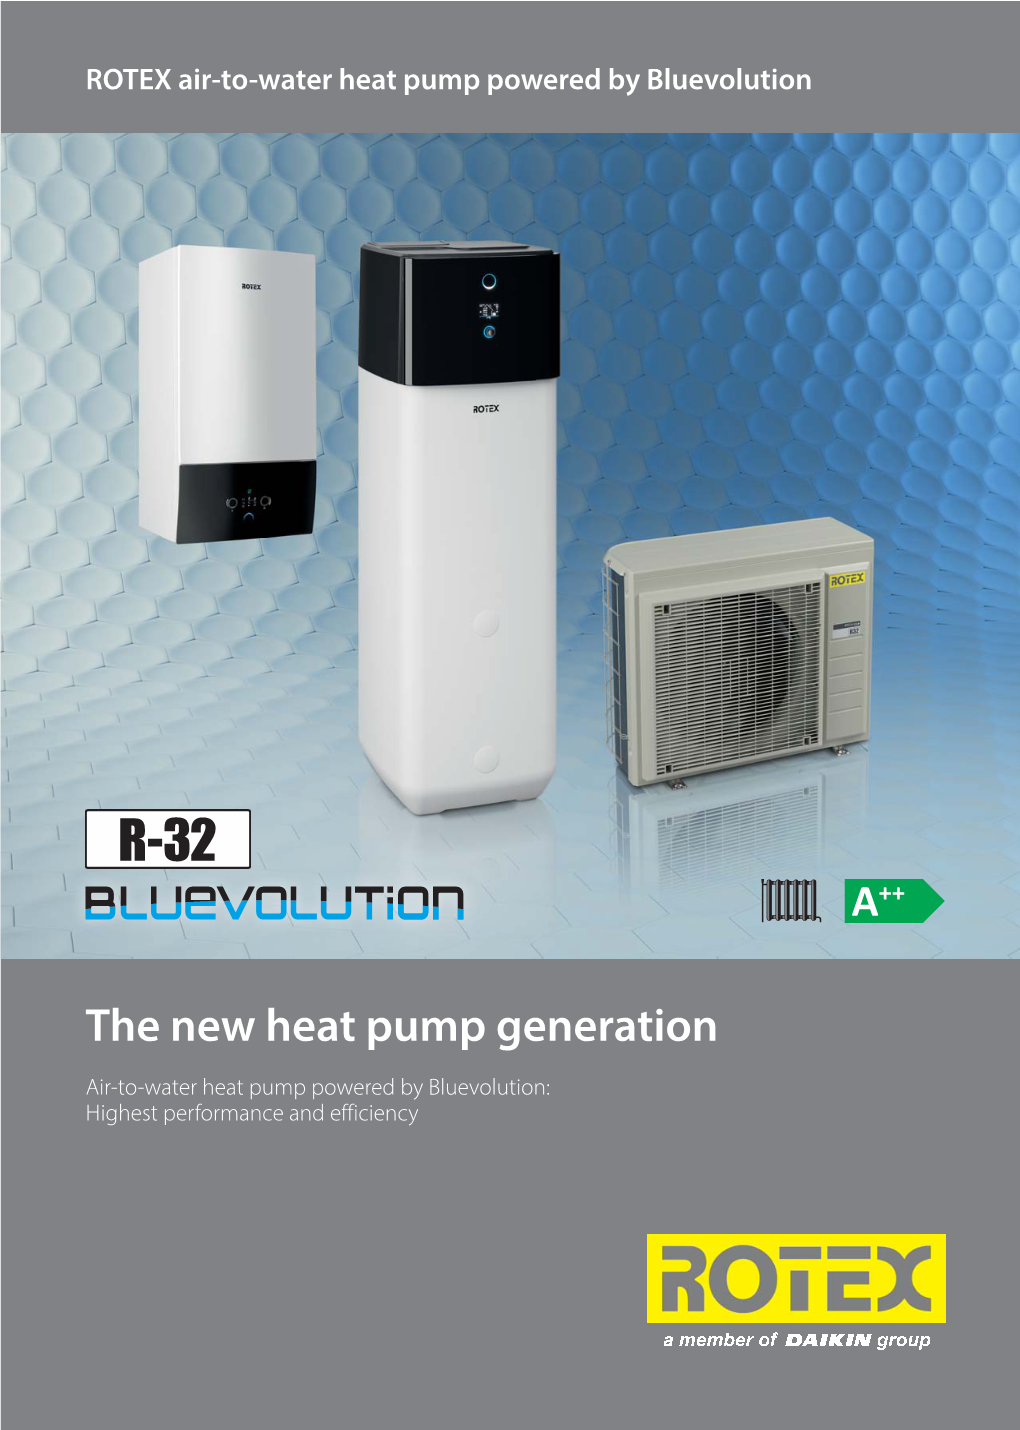 ROTEX Air-To-Water Heat Pump Powered by Bluevolution